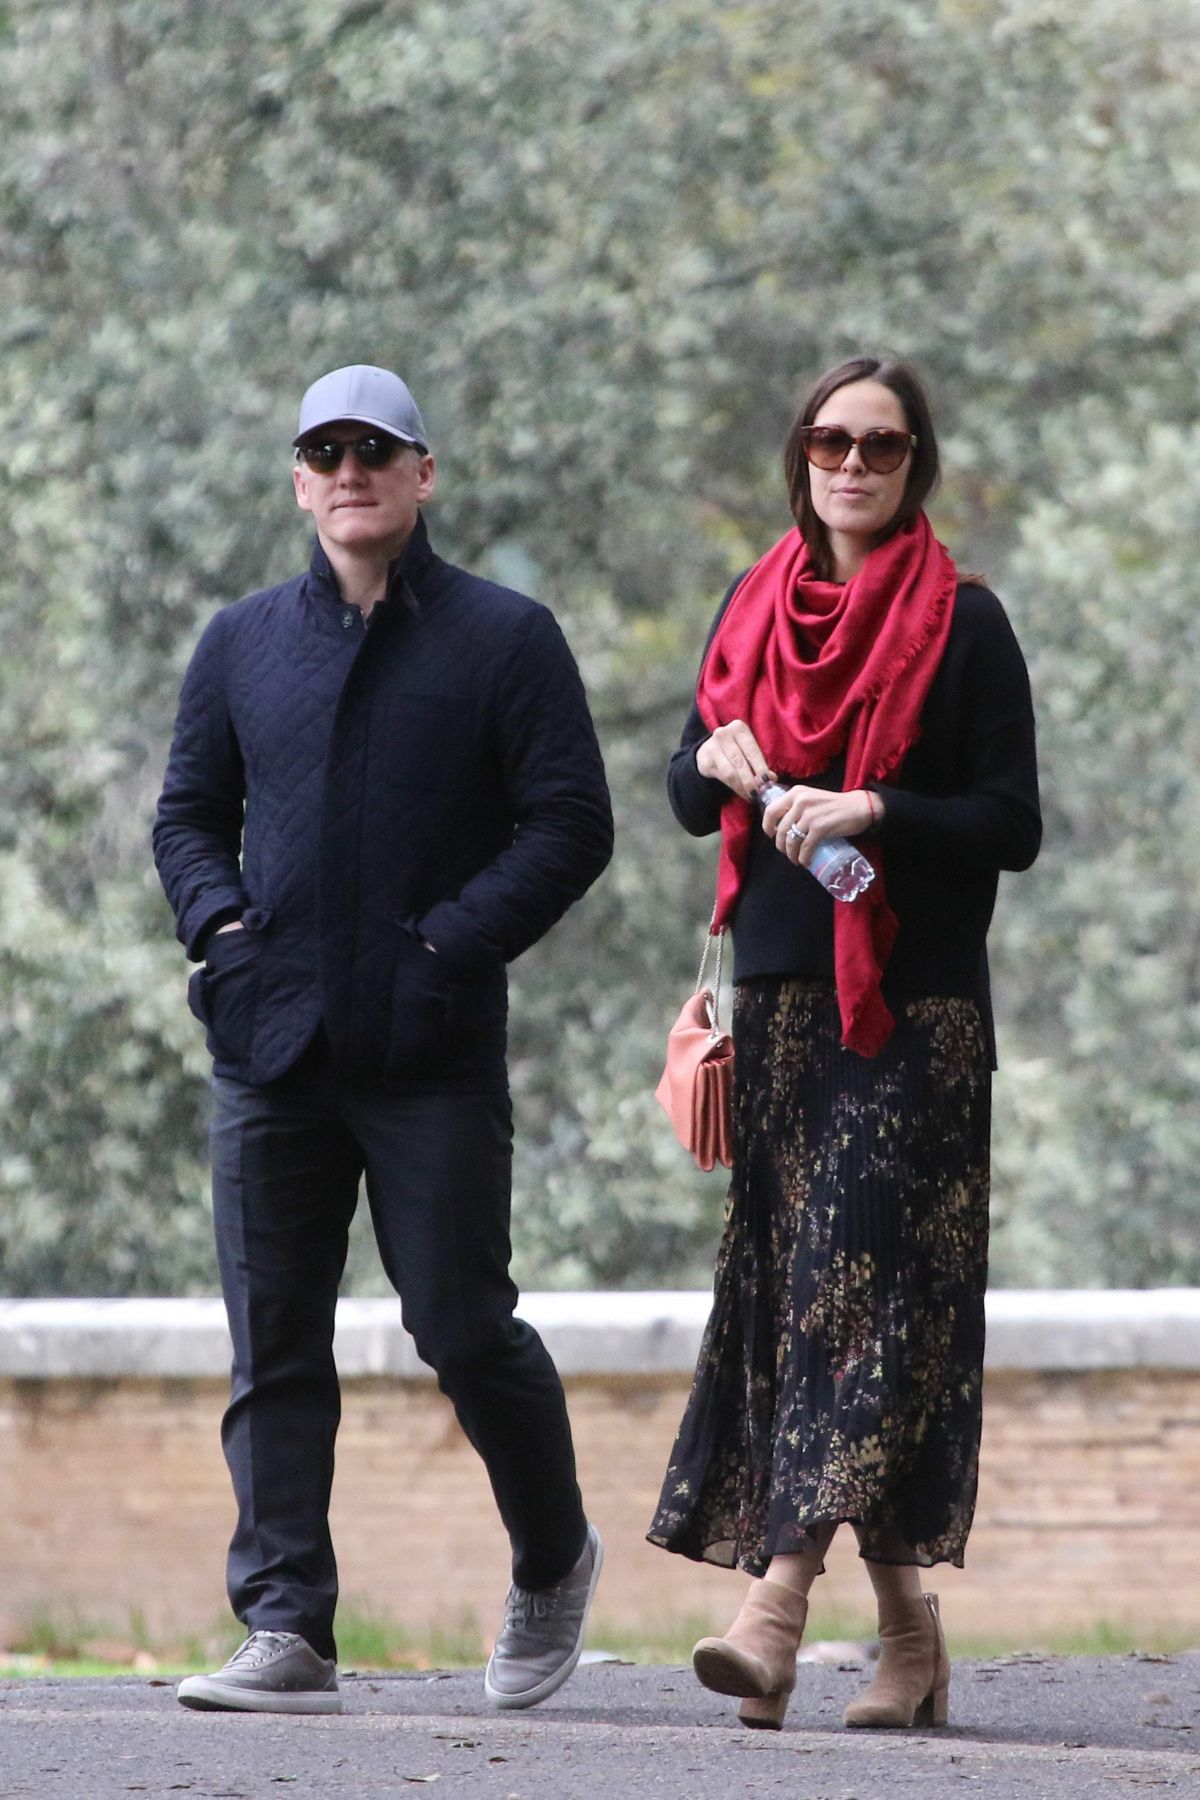 ANA IVANOVIC and Bastian Schweinsteiger on Vacation in Rome 11/11/2017